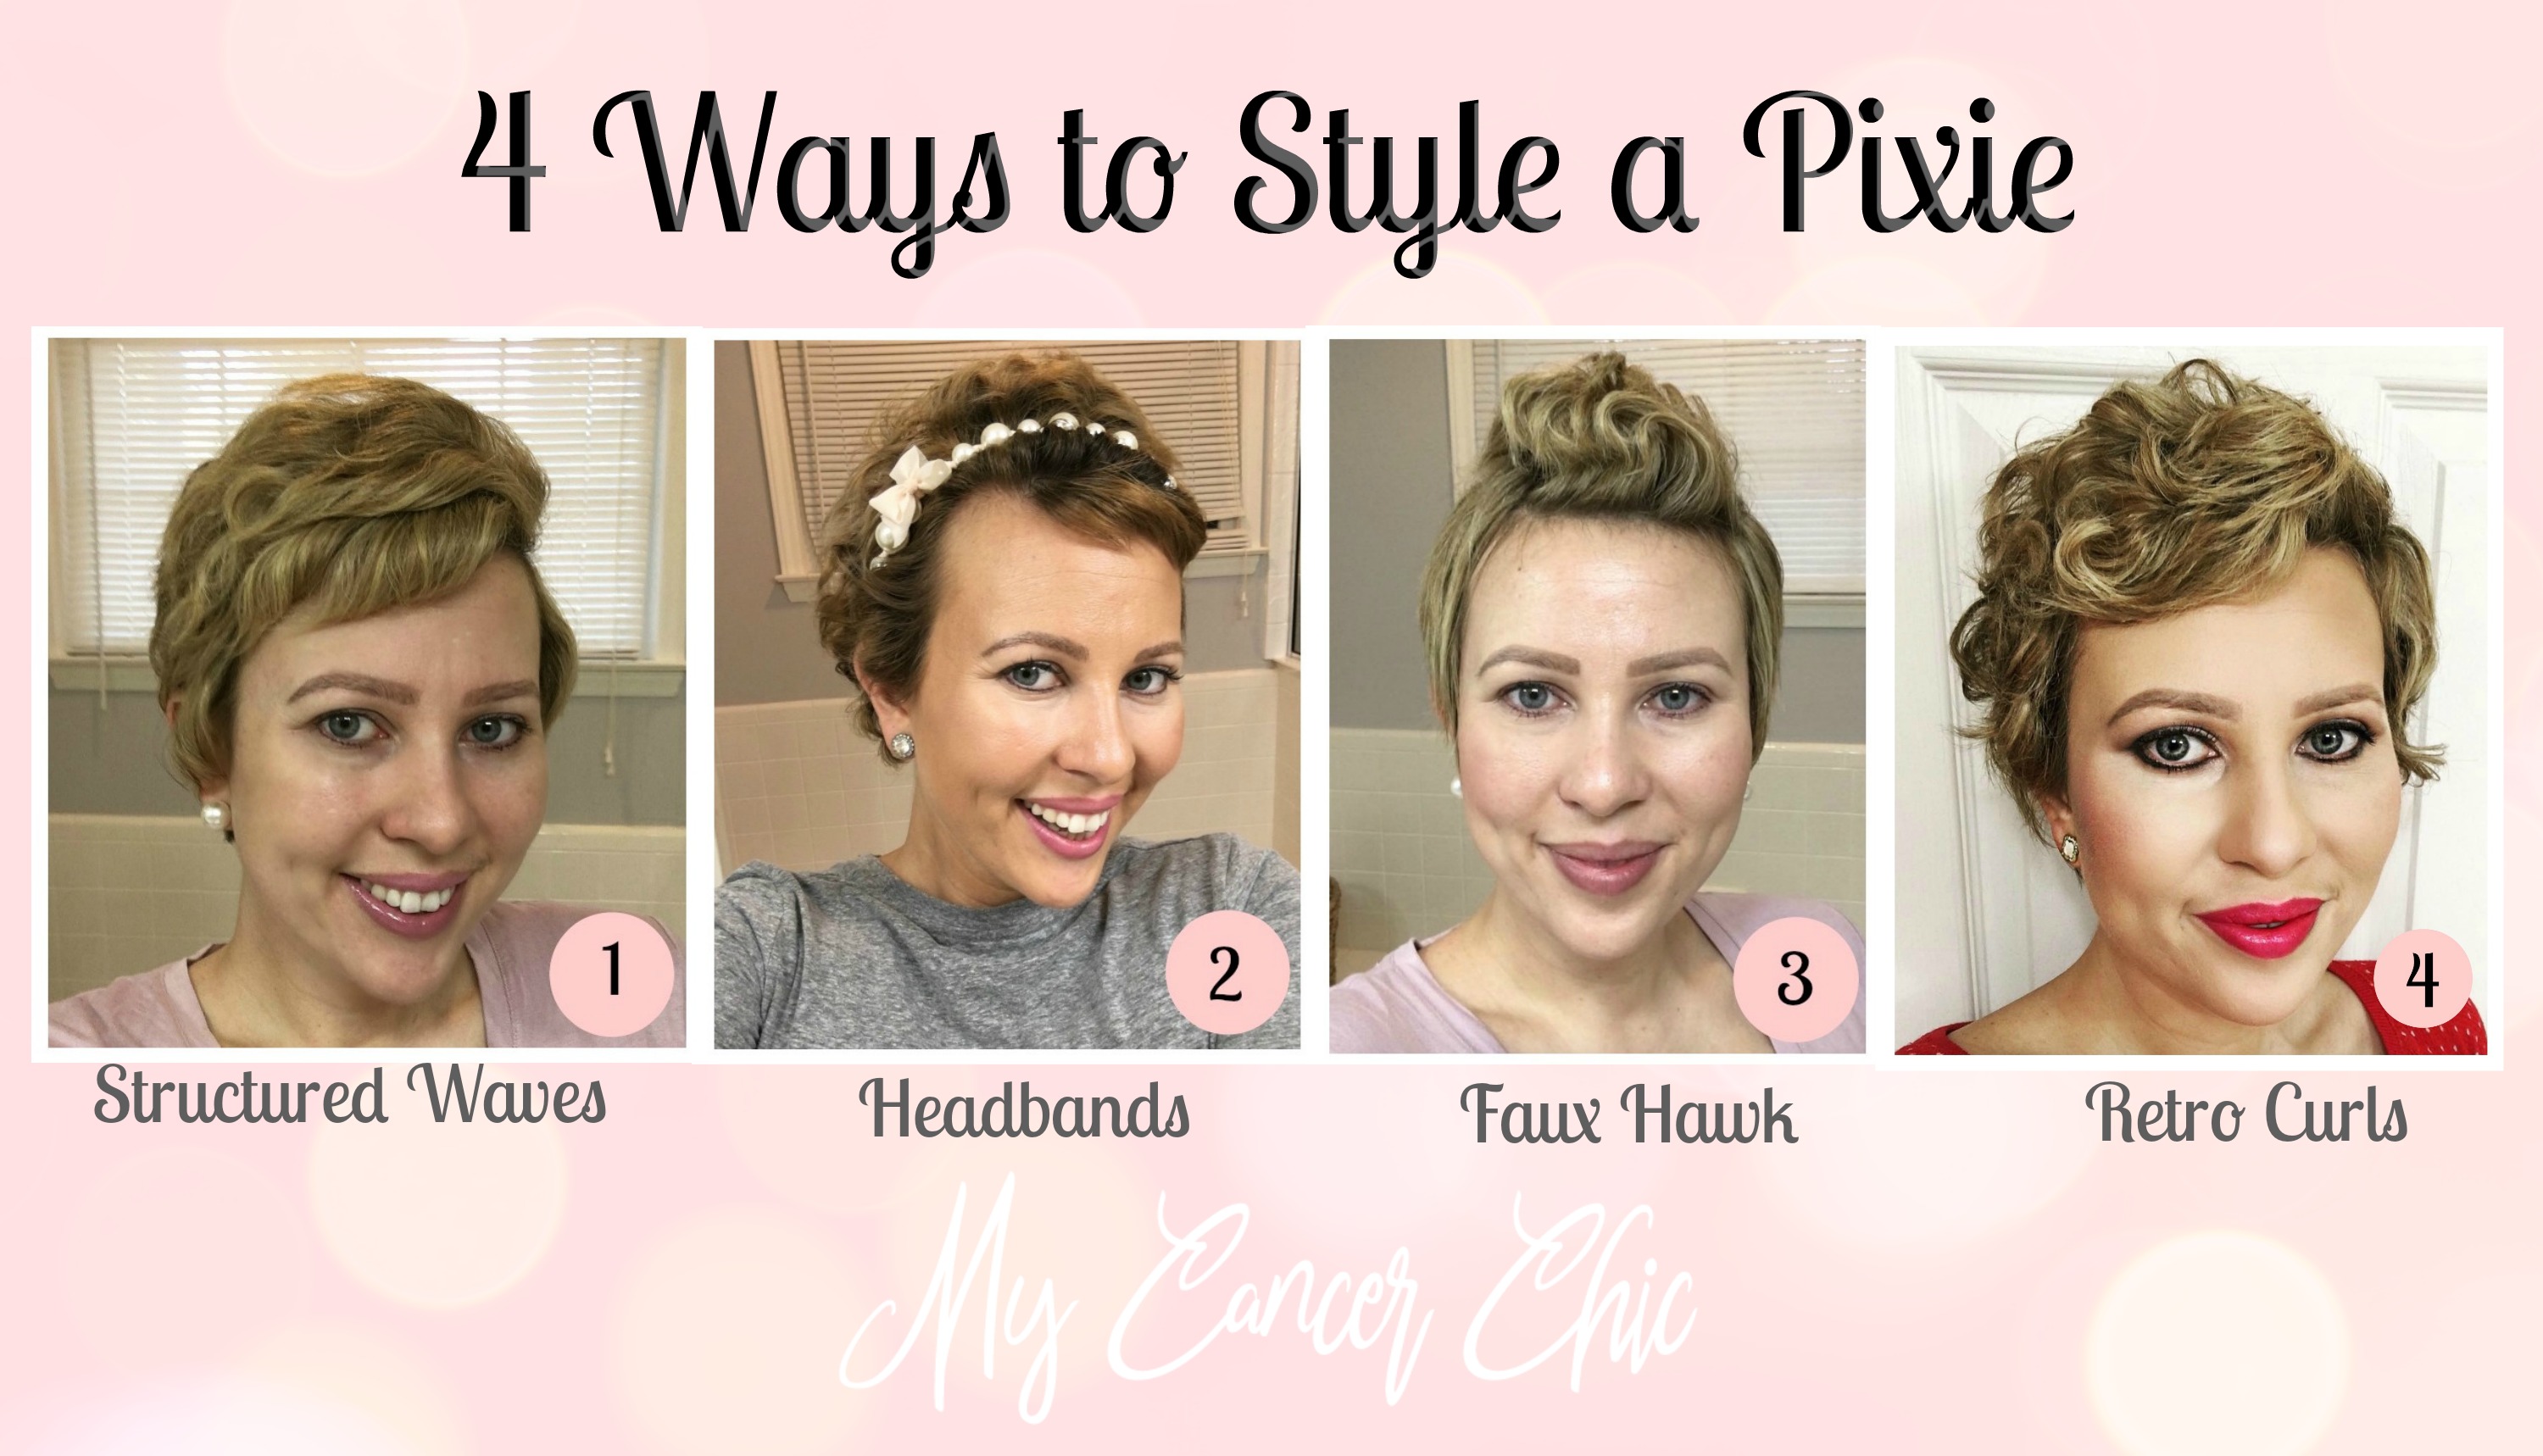 4 Ways to Style a Pixie Haircut - My Cancer Chic